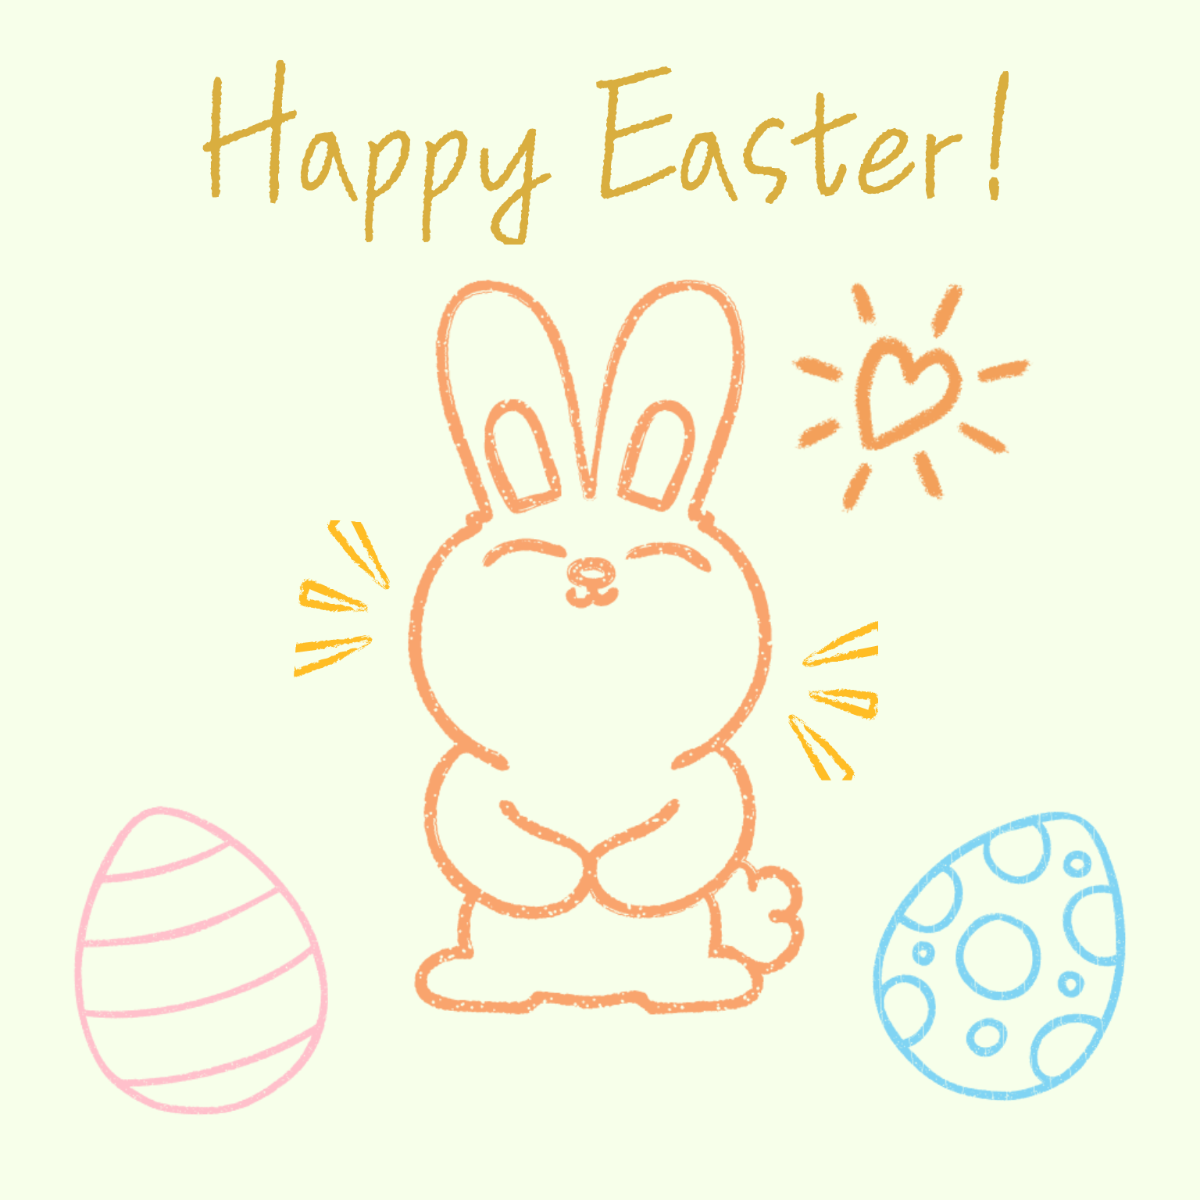 Free Easter Chalk Design Vector Template